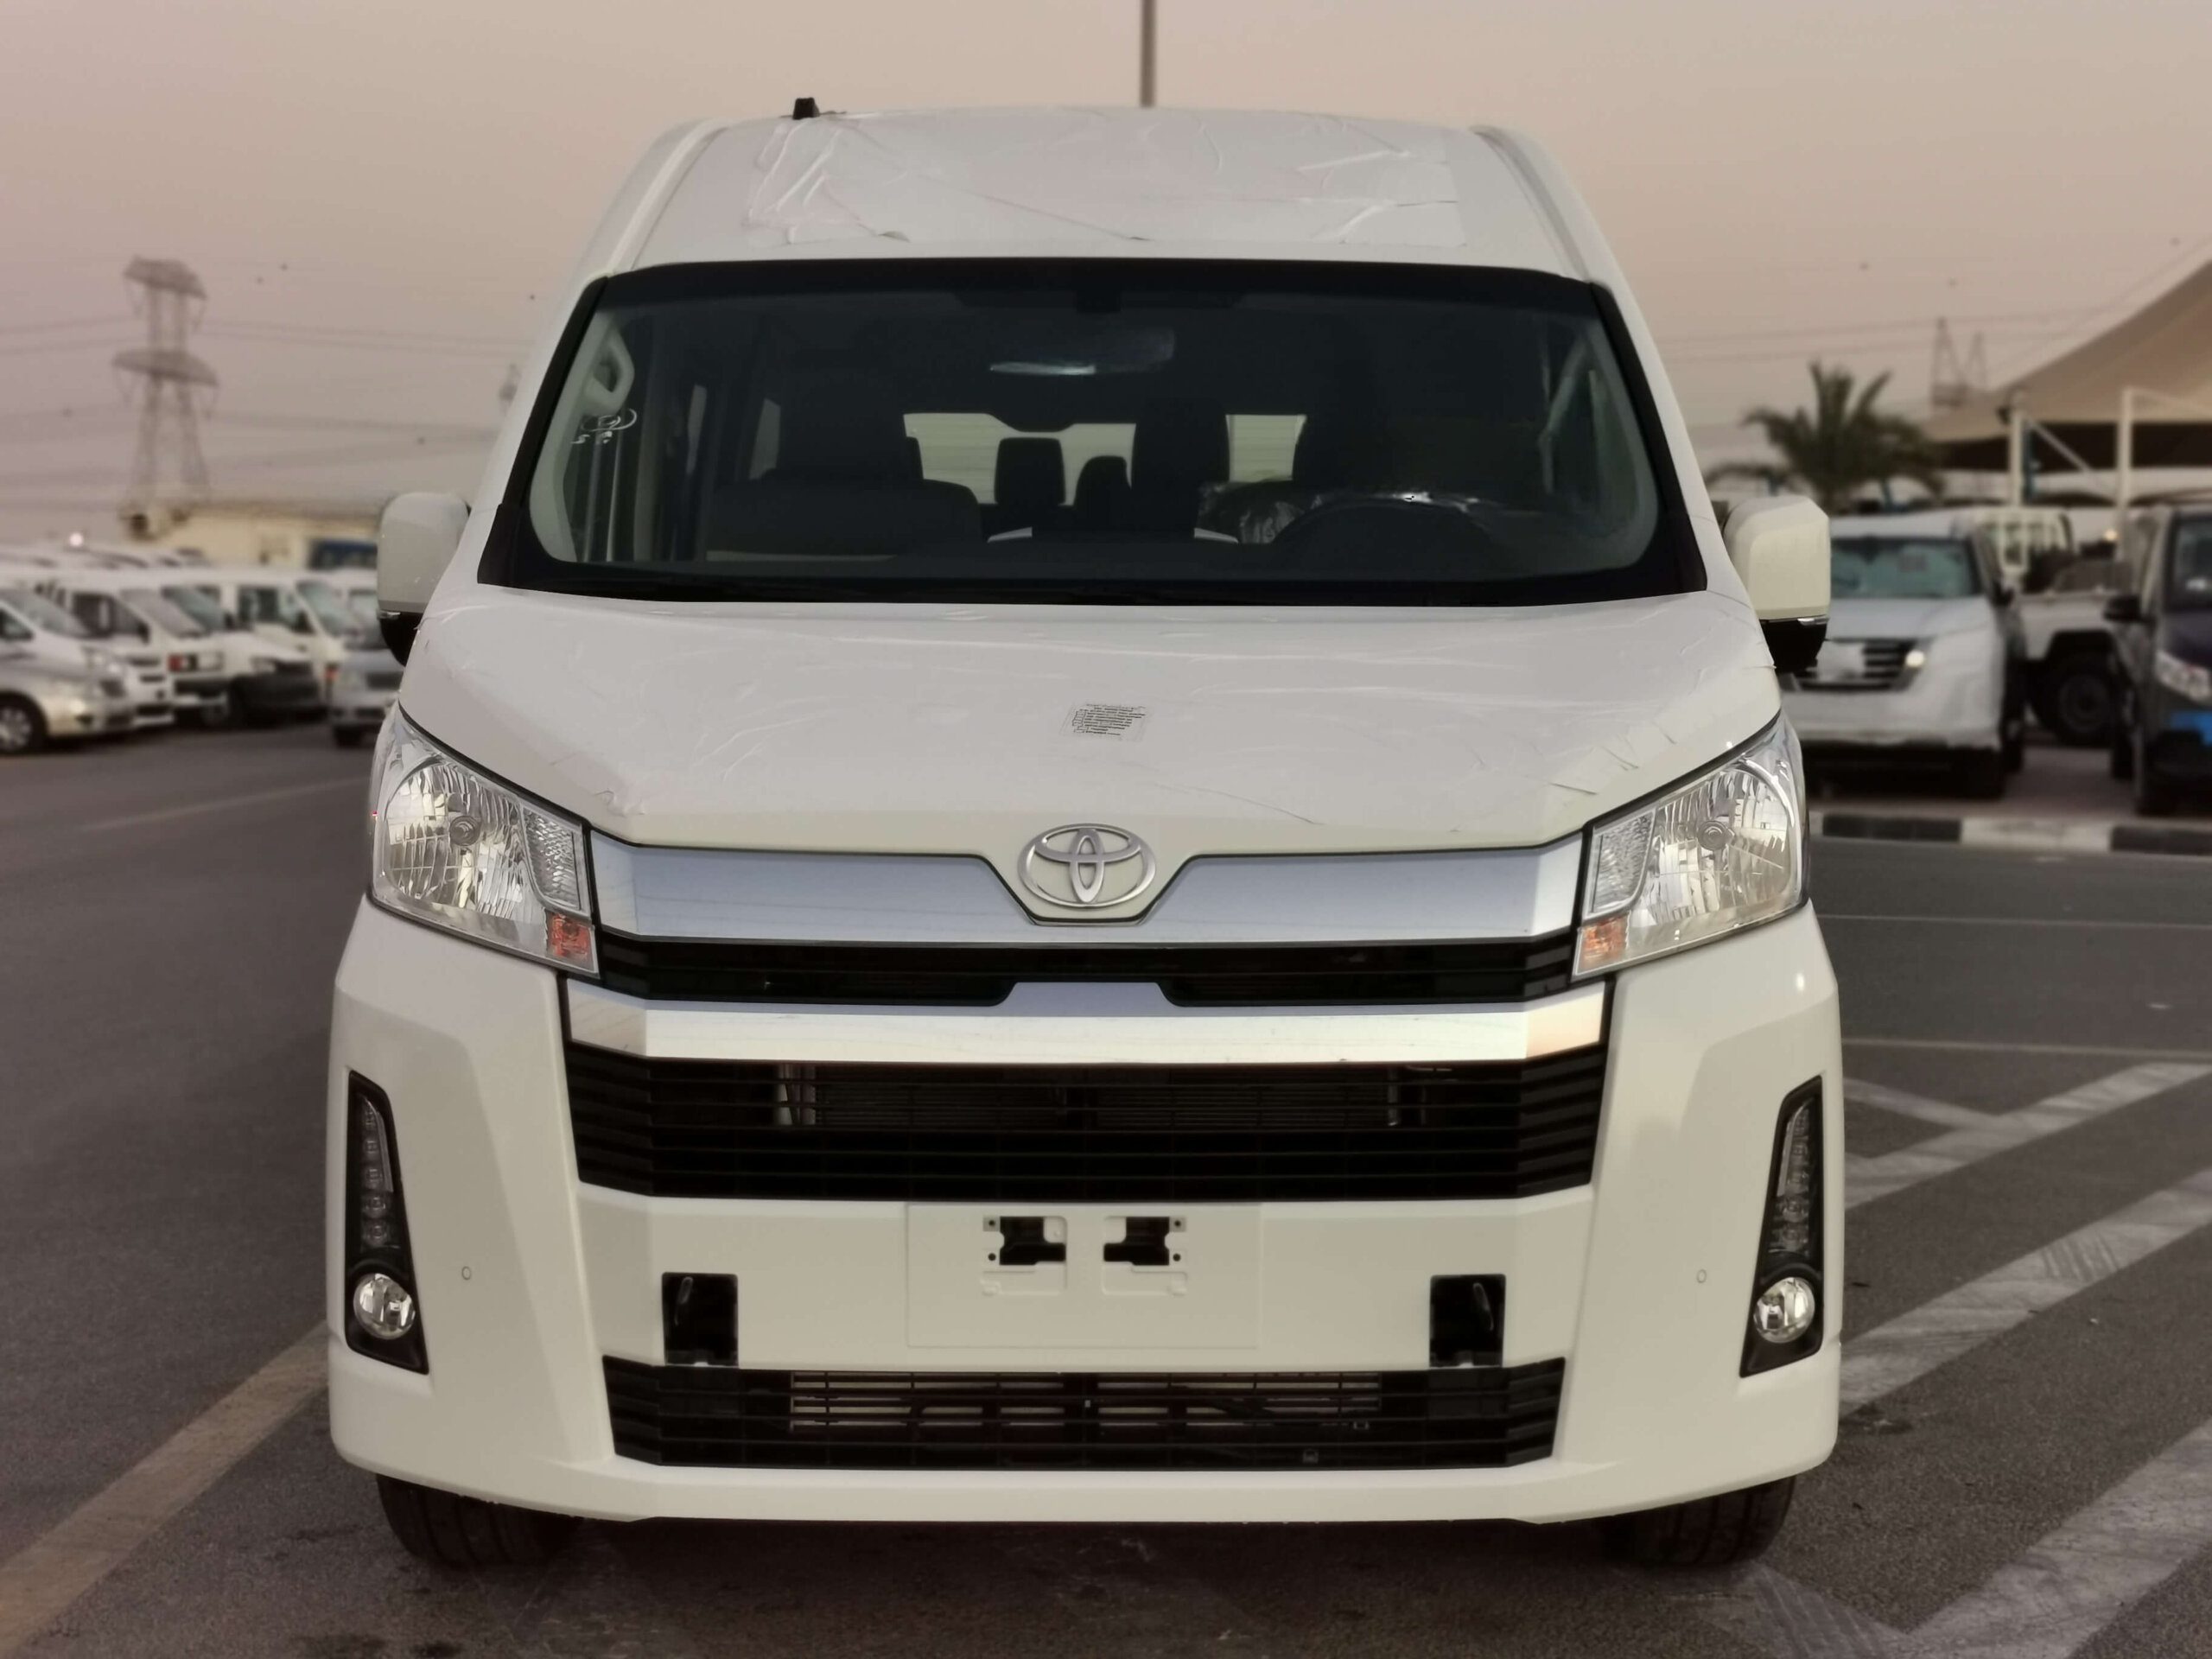 Toyota Hiace 2022 front view